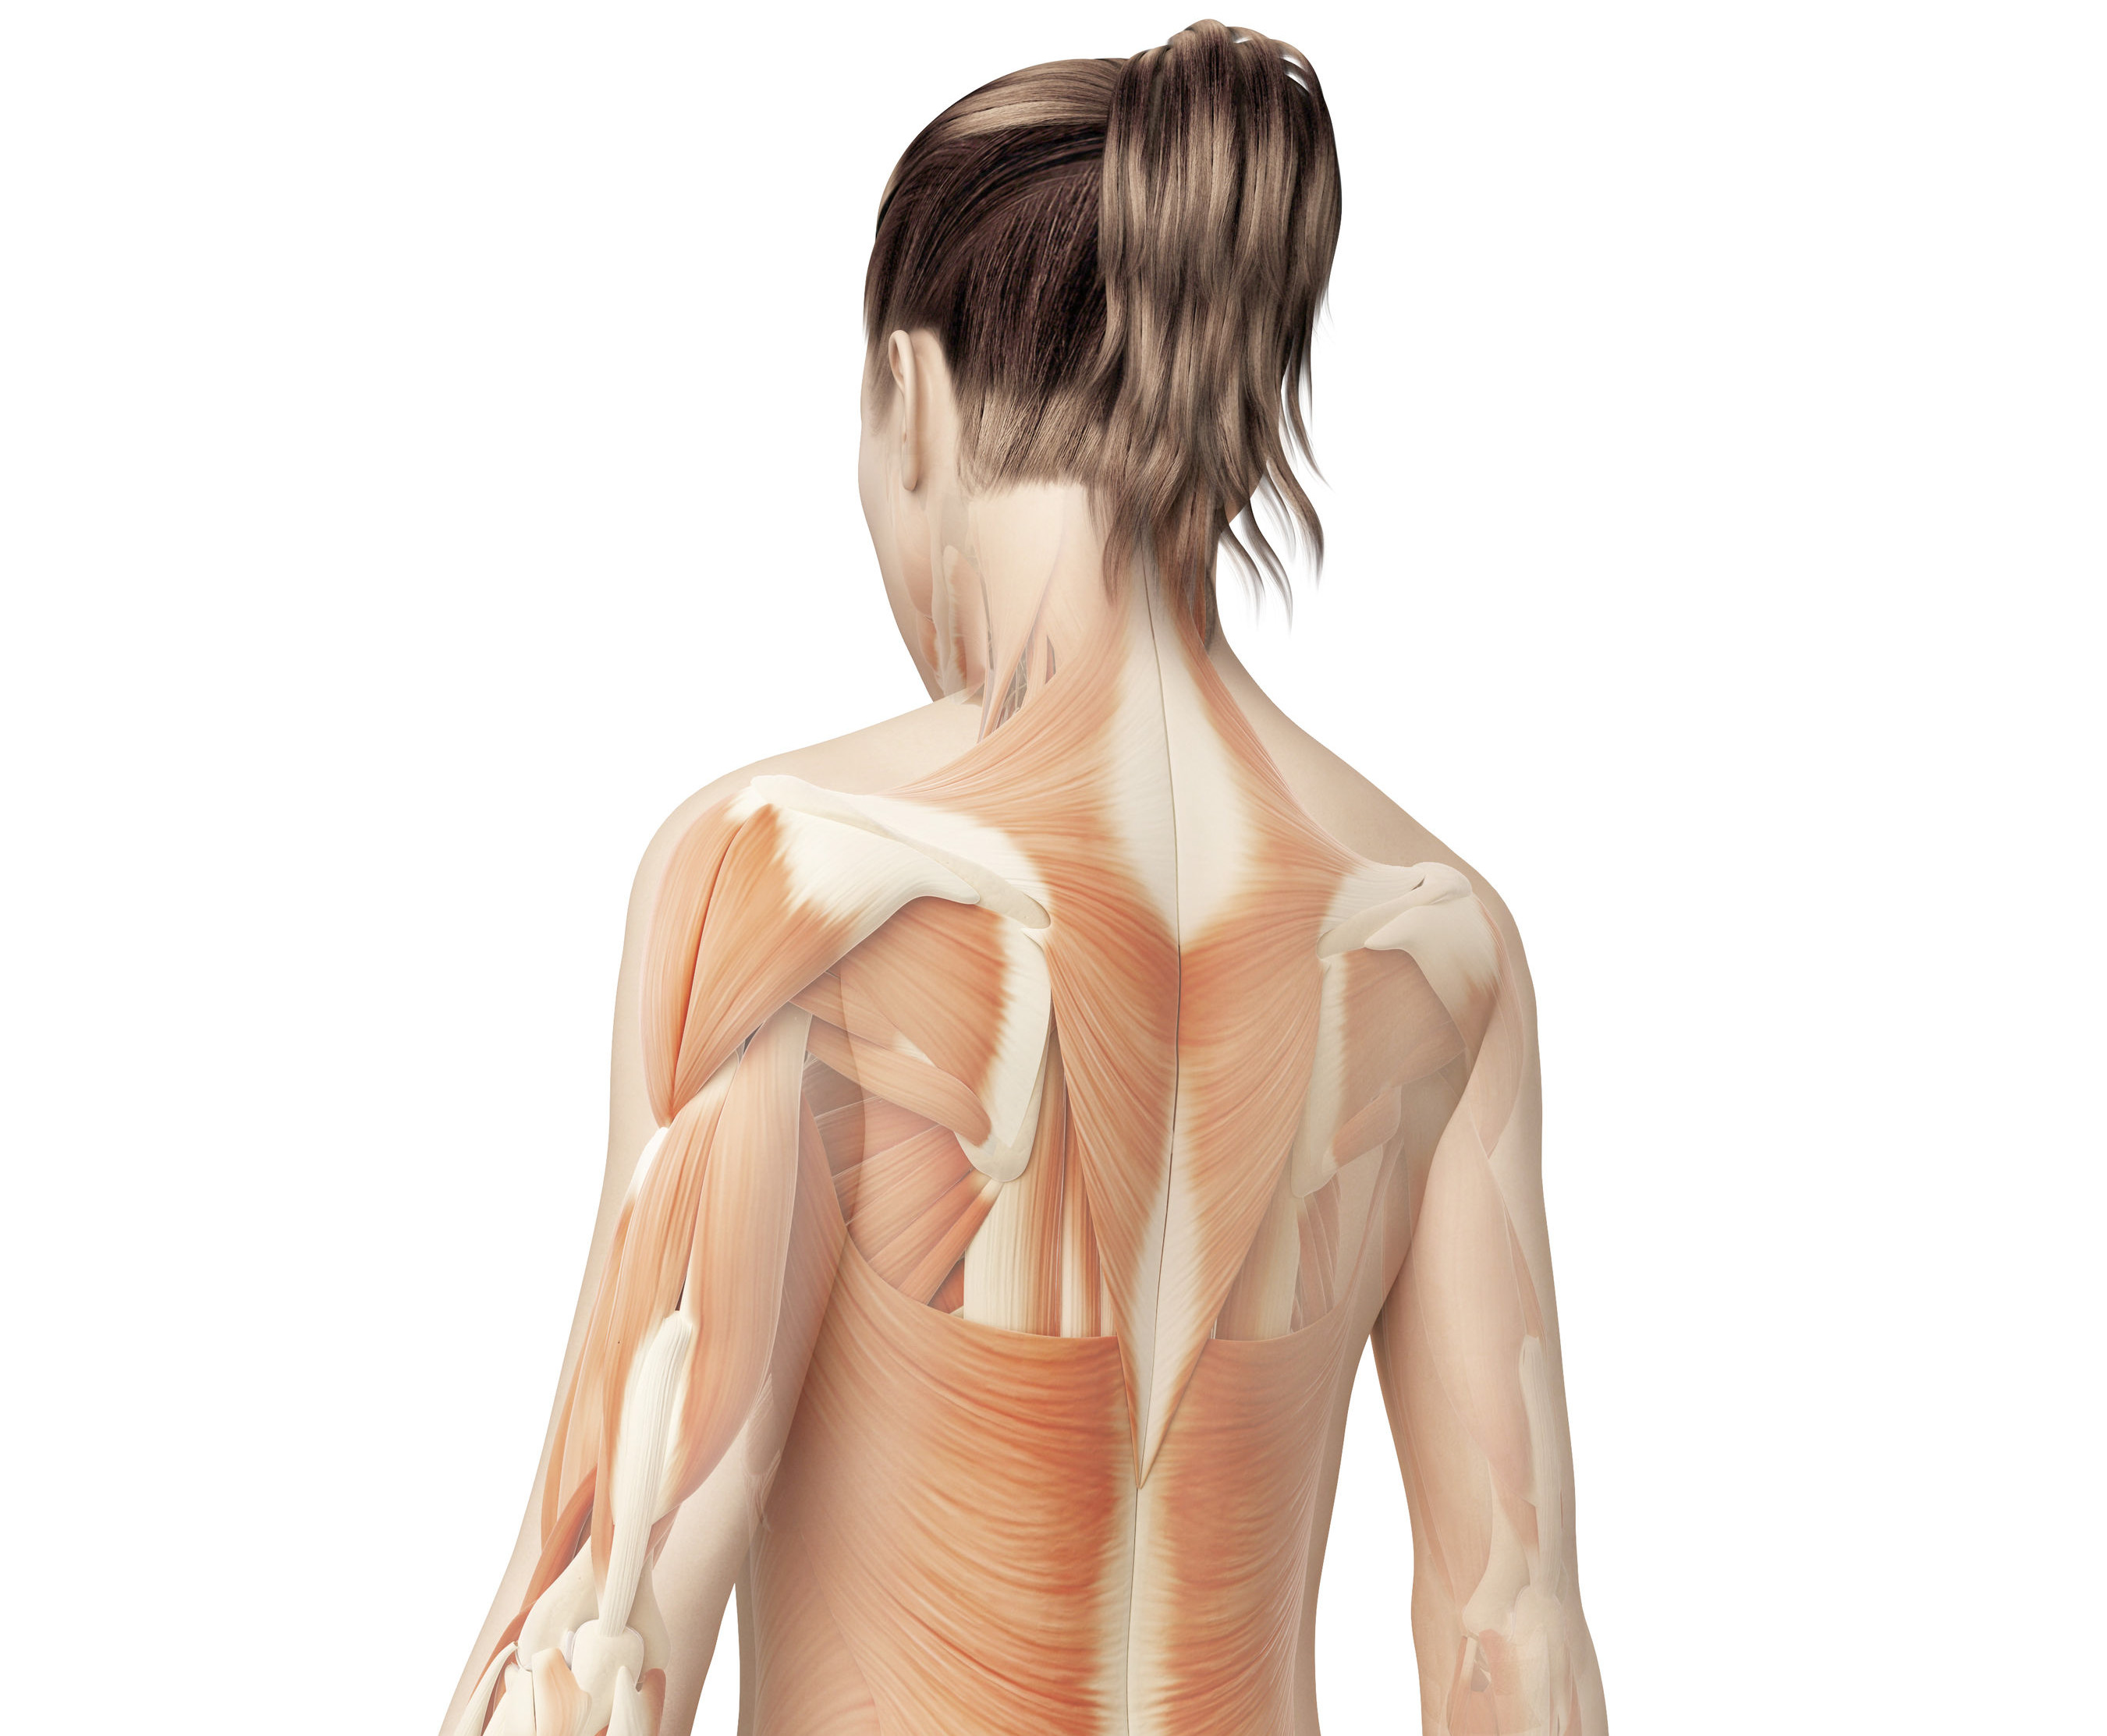 Muscles Move and Support the Spine